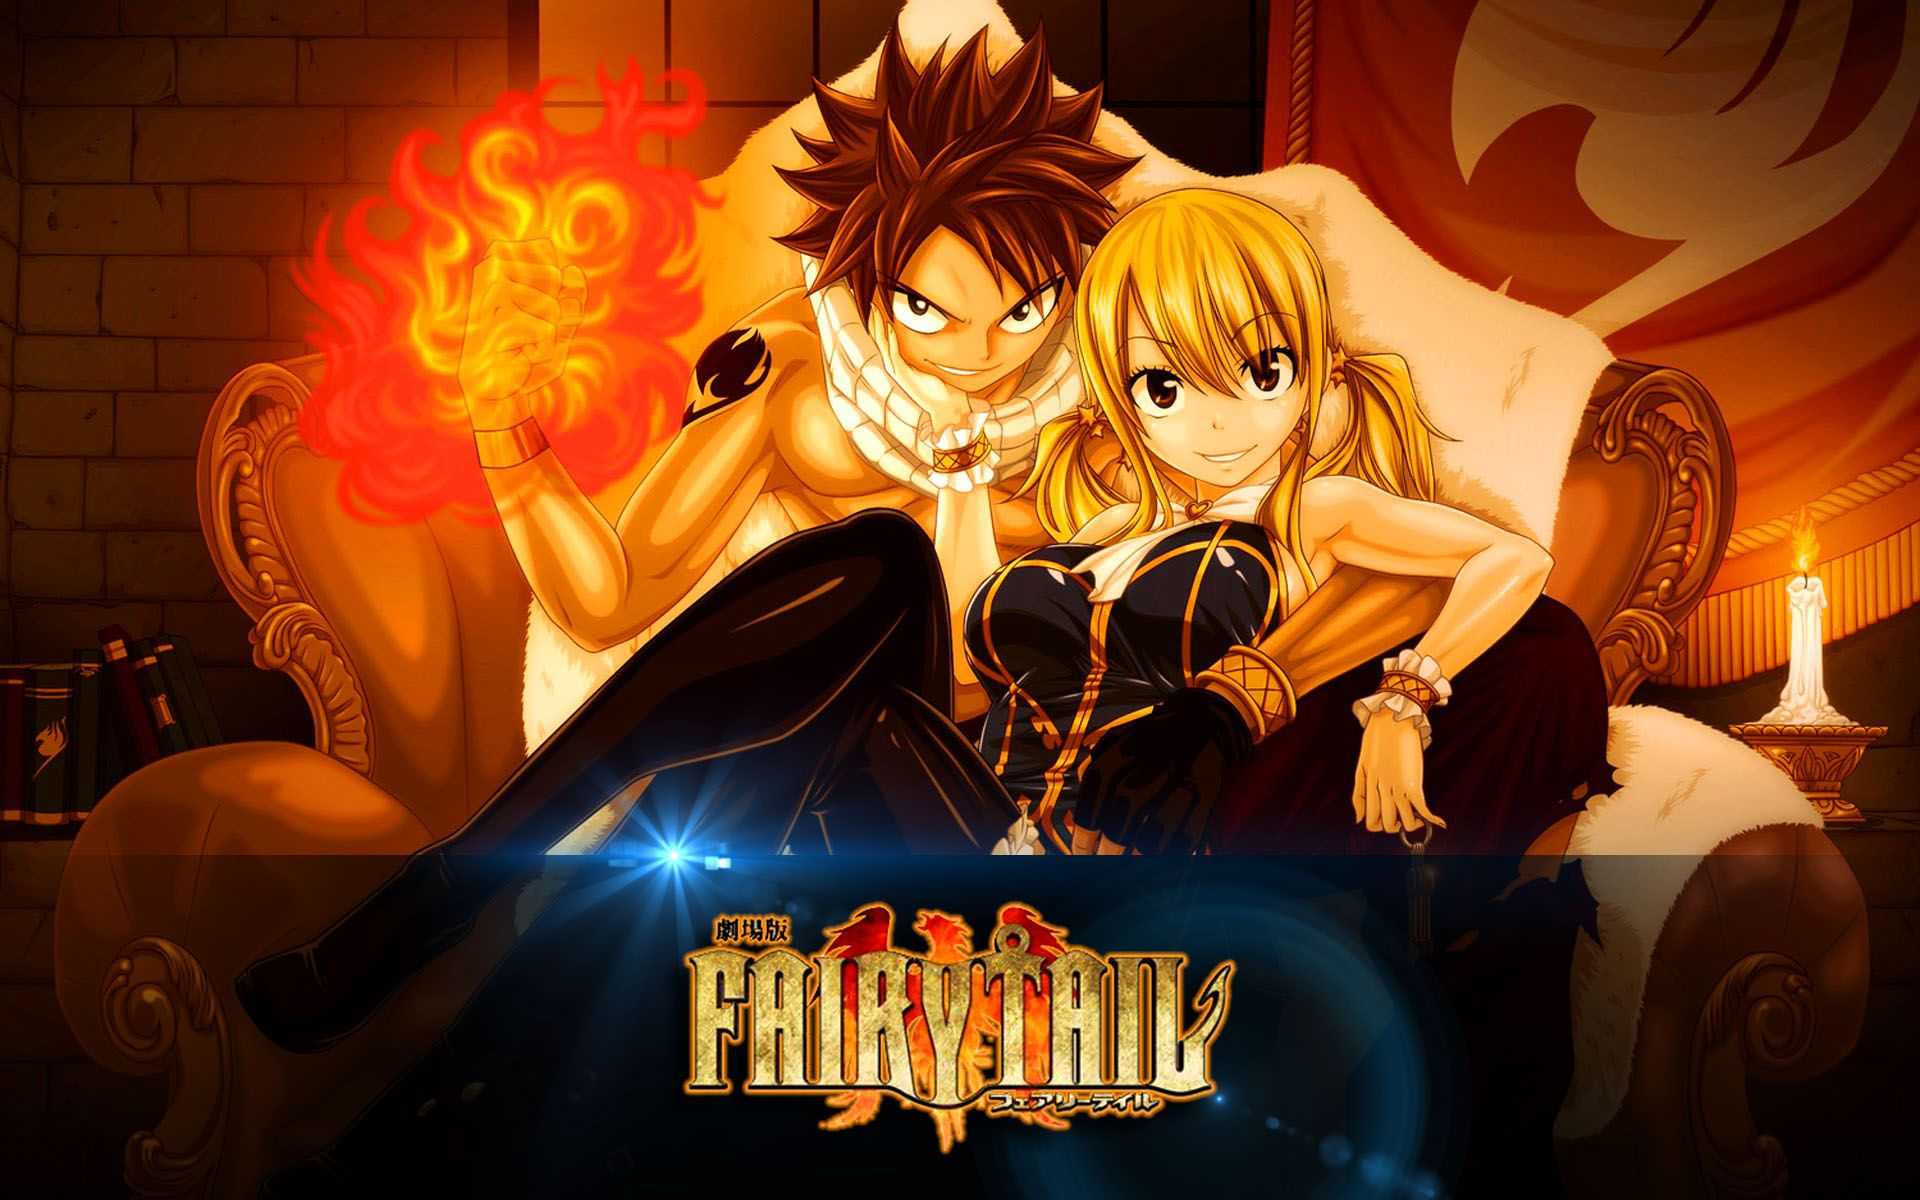 Desktop Of Fairy Tail Lucy And Natsu Dragon Force Wallpaper Anime